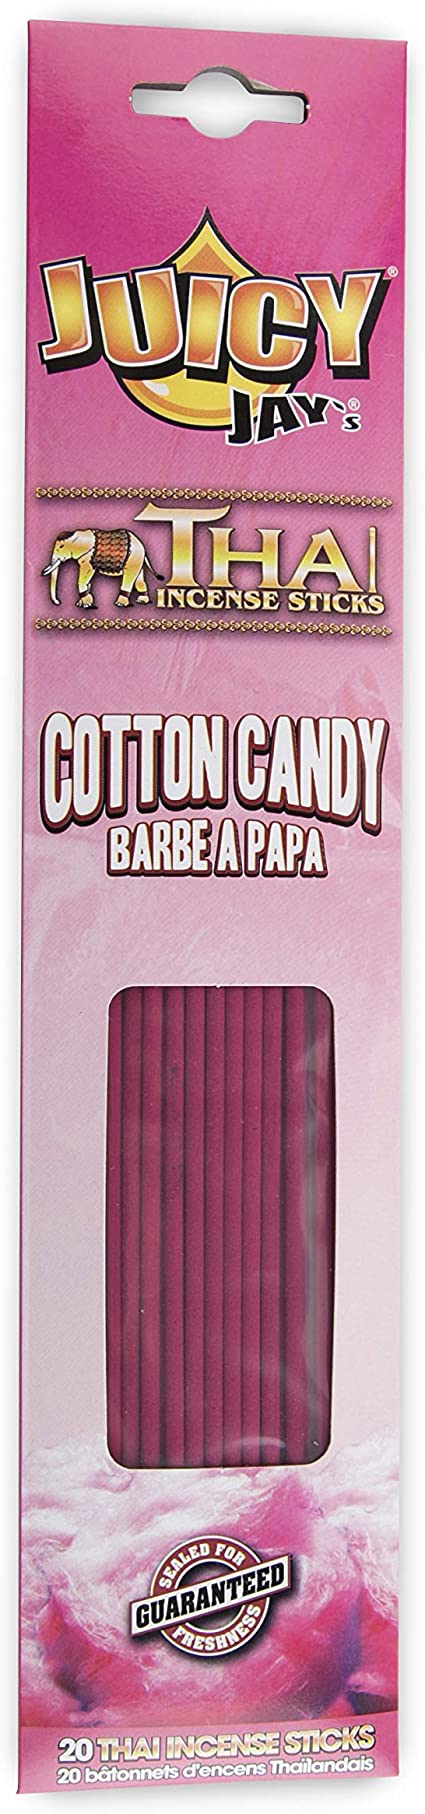 Juicy Jays Cotton Candy